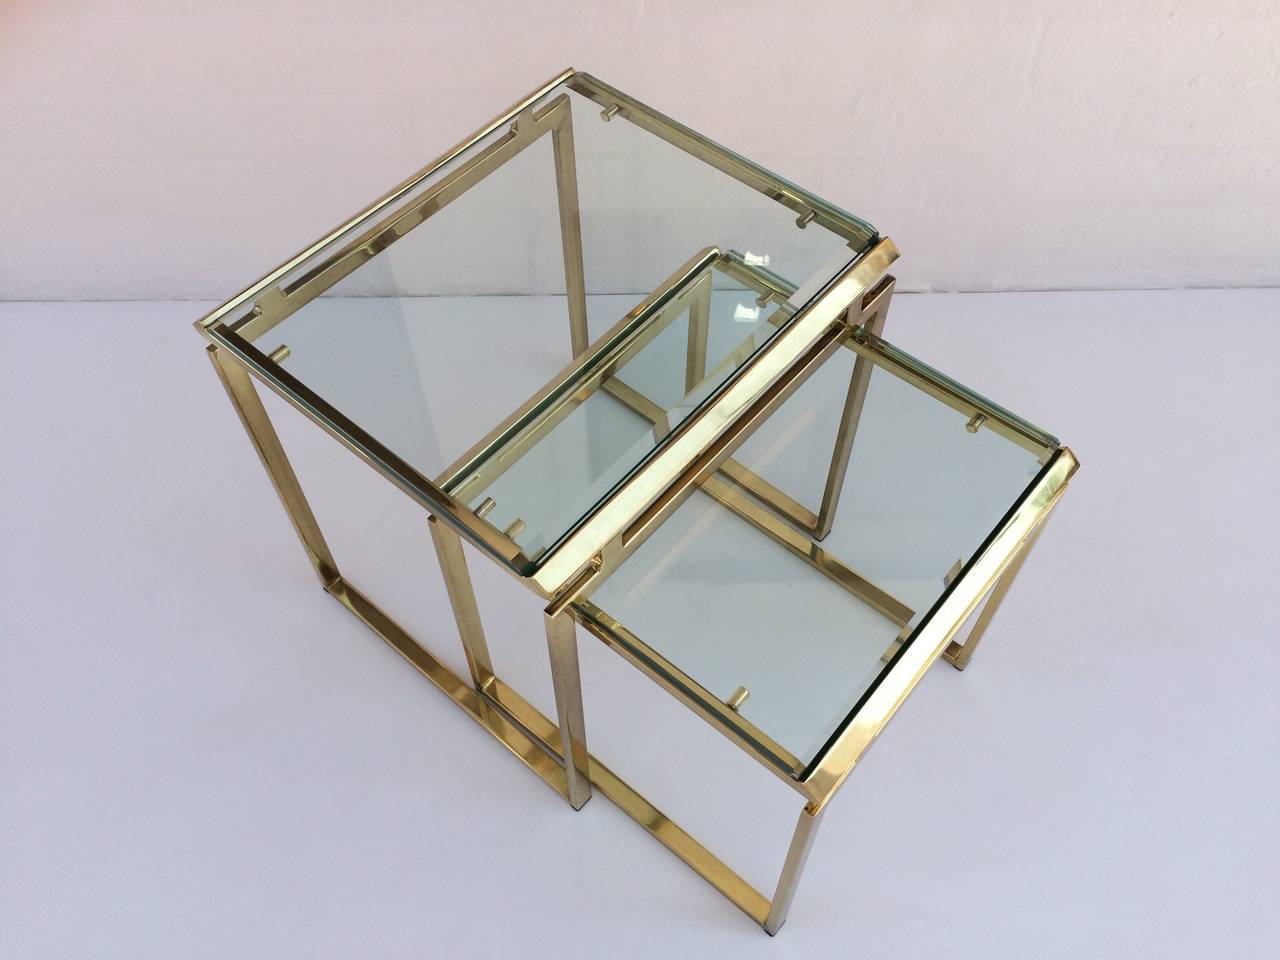 Late 20th Century Polished Brass and Beveled Glass Nesting Tables Designed by Milo Baughman